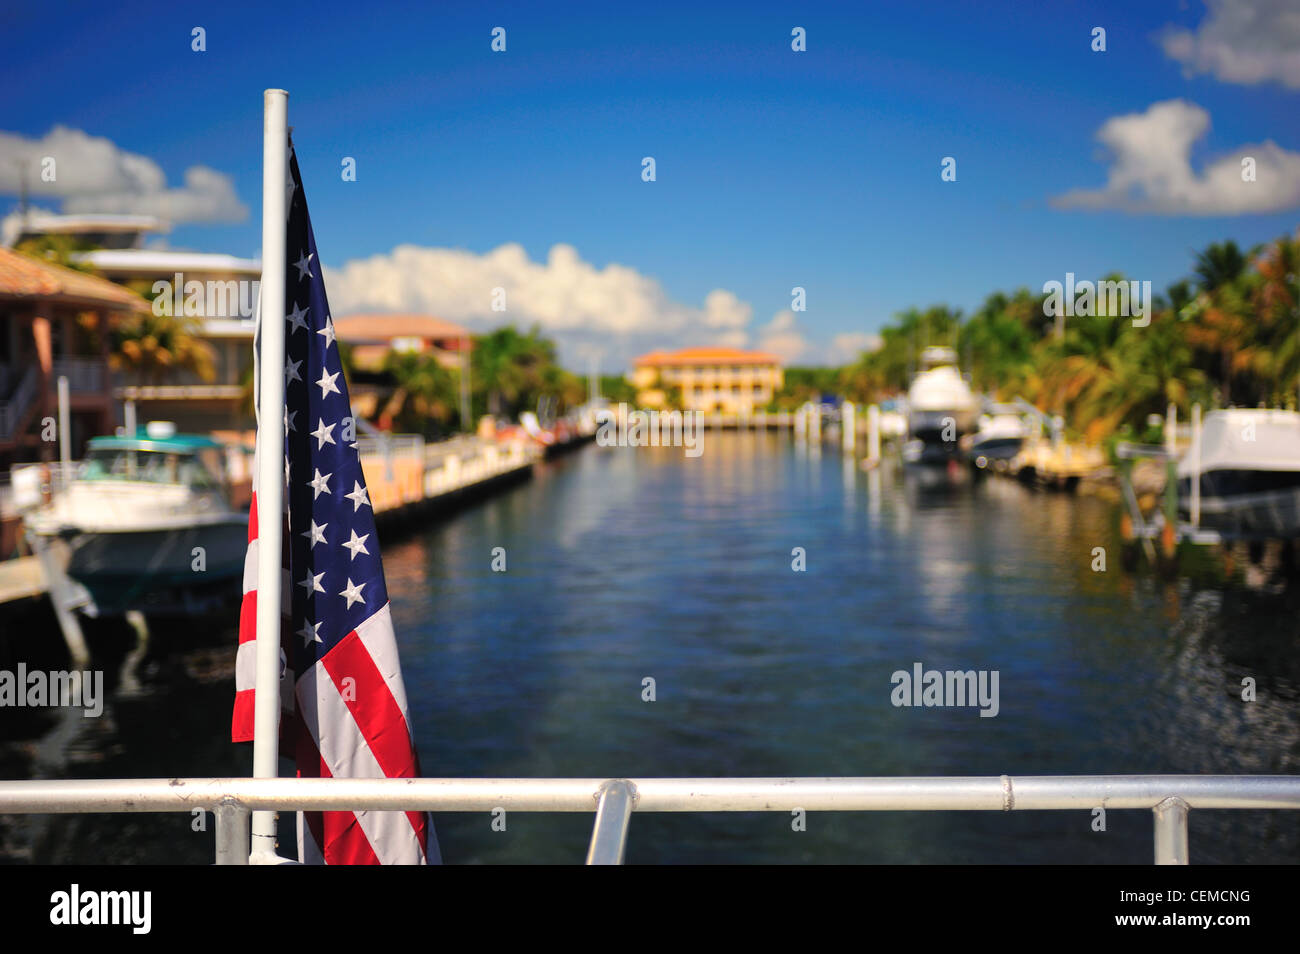 Photograph of the Stars and Stripes star spangled banner photographed against the backdrop of Key Largo, Florida Stock Photo